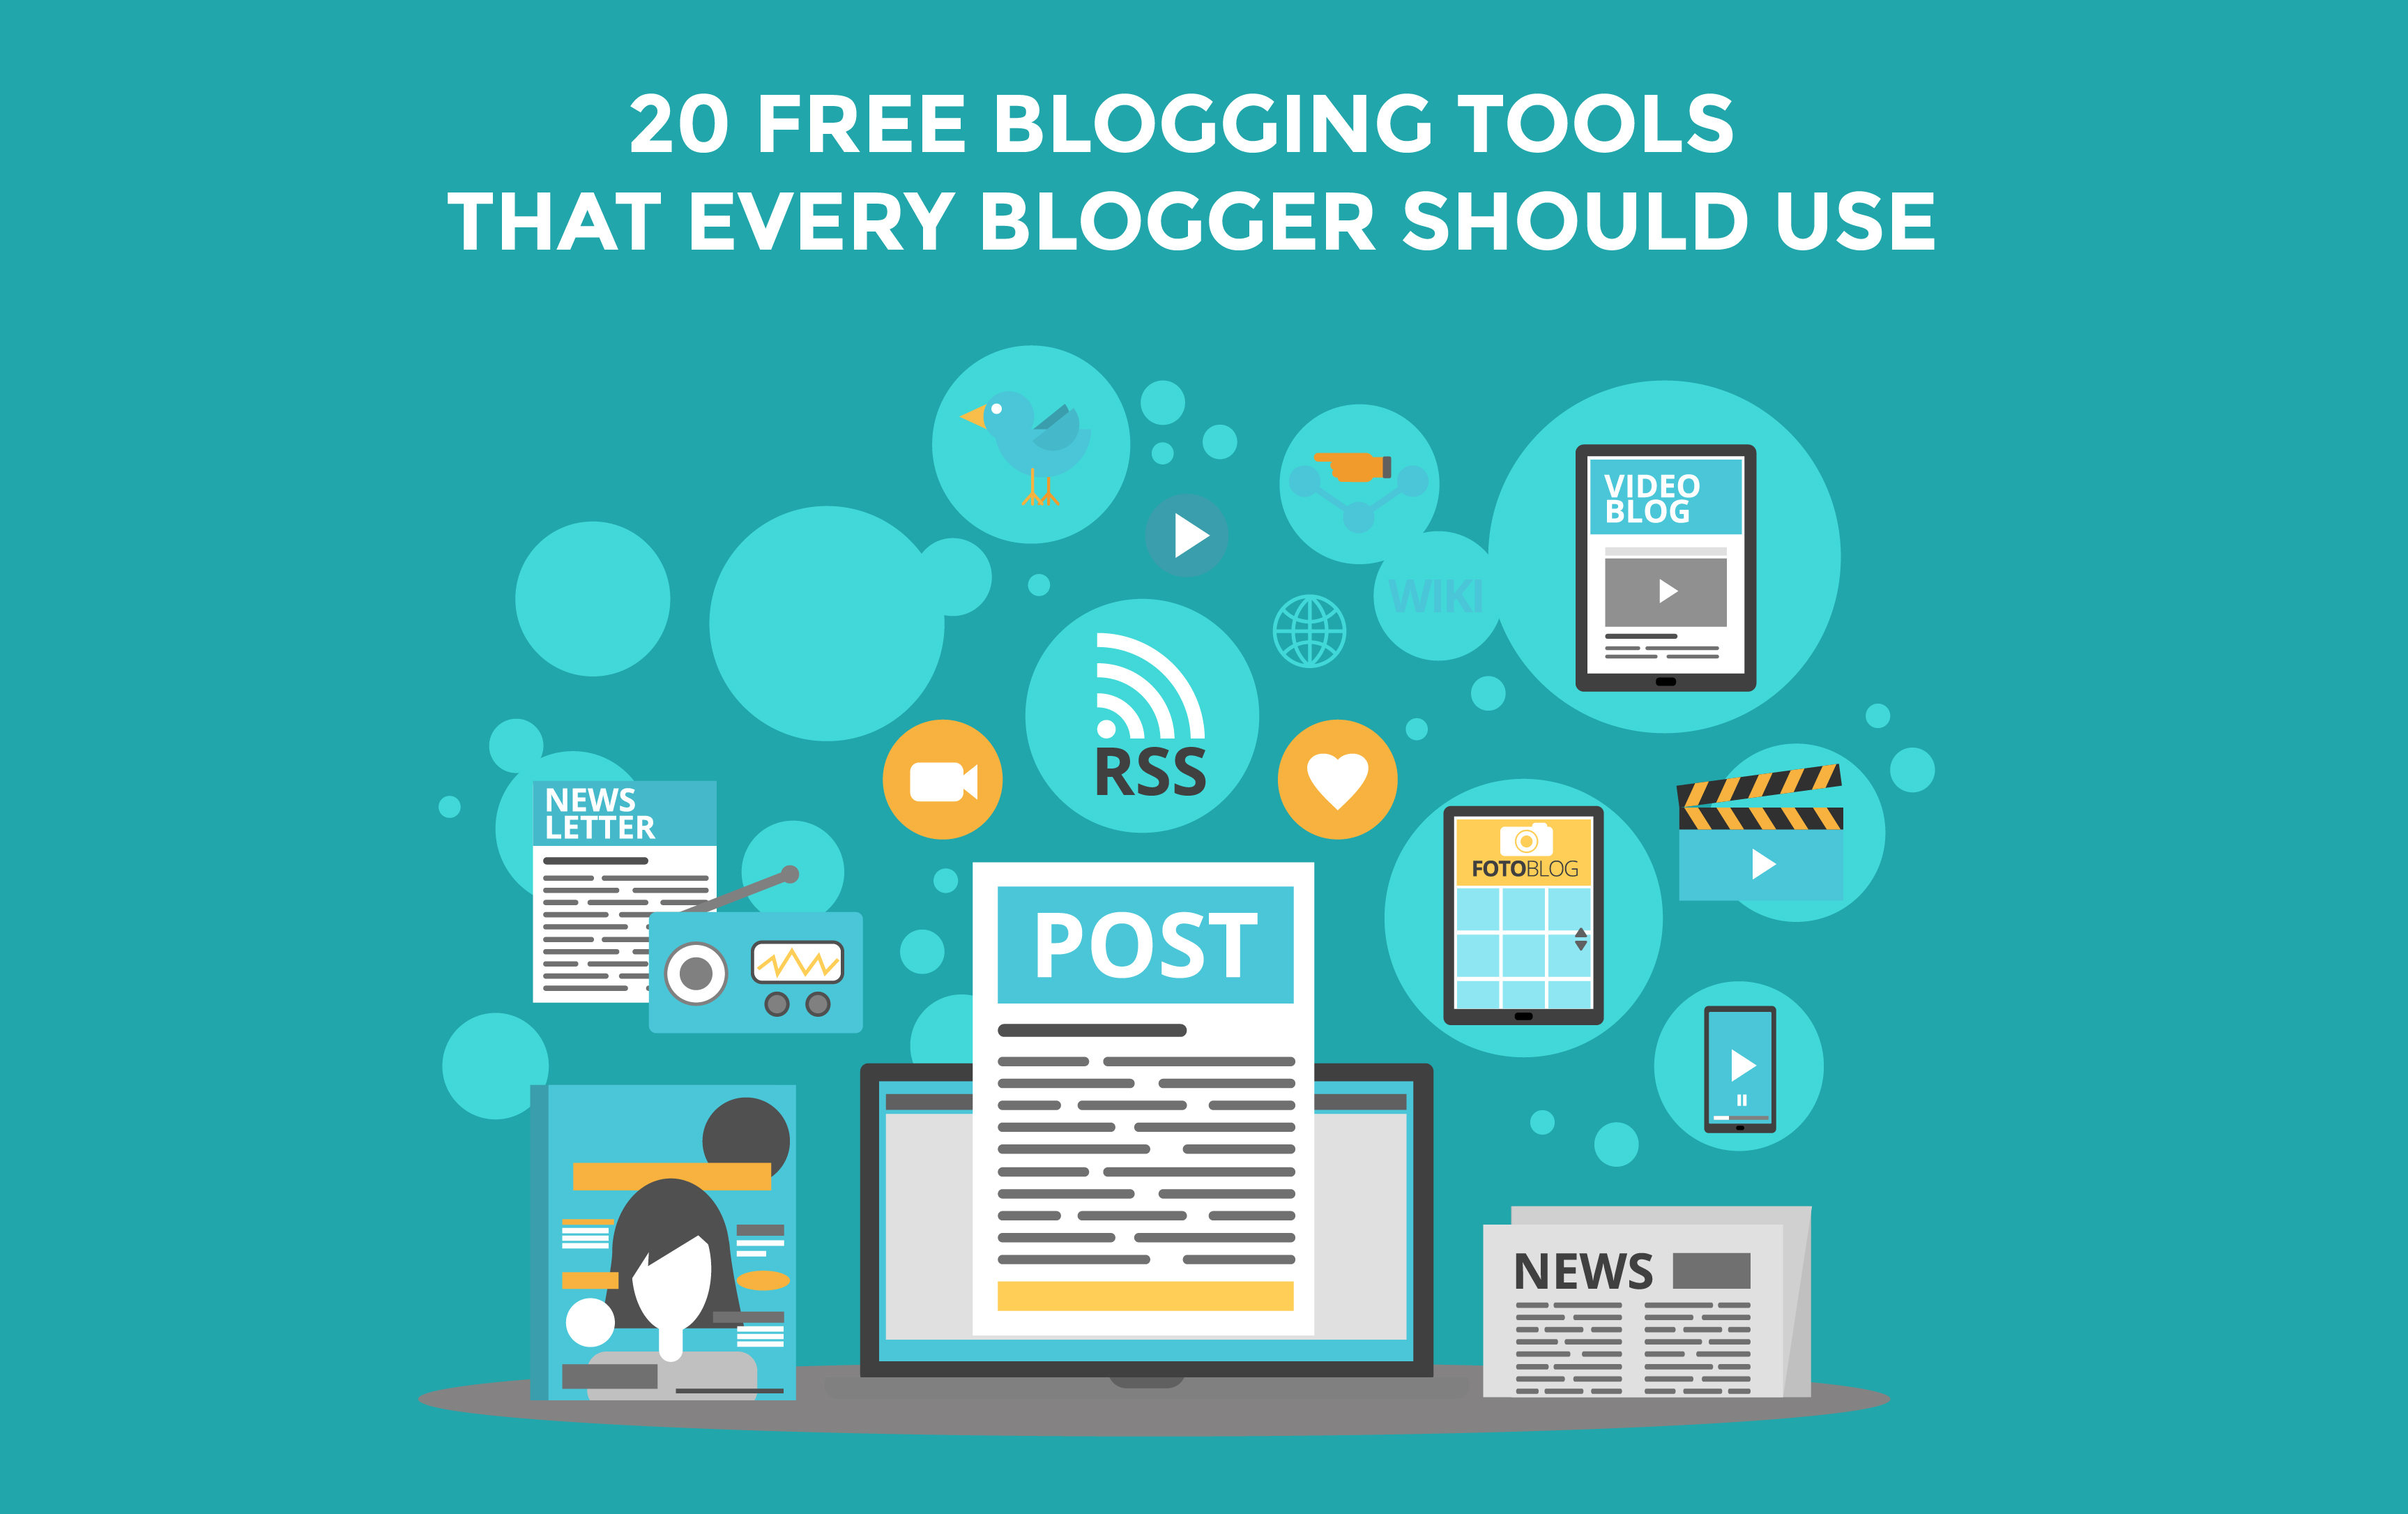 free blogging tools every blogger should use - social media scheduler